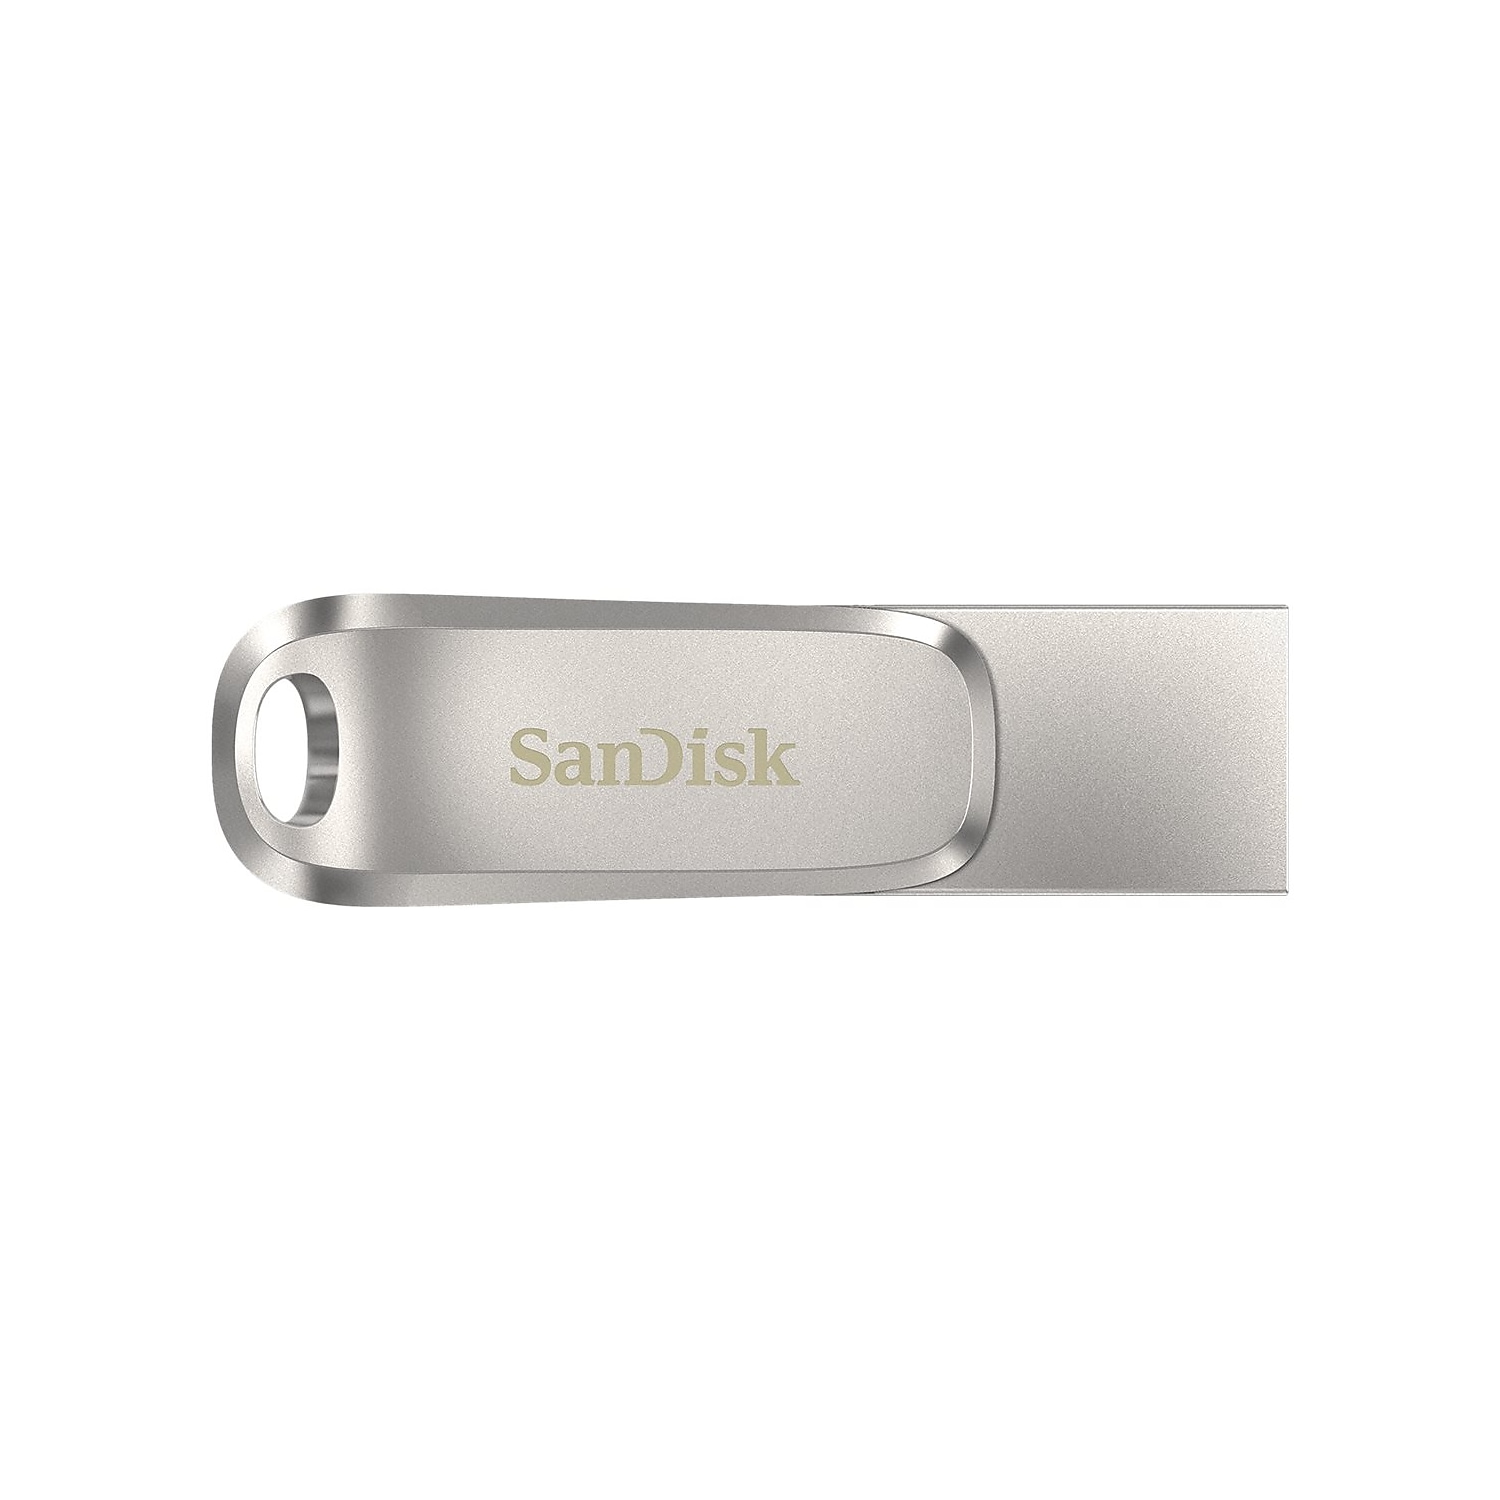 Sandisk SDDDC4-064G-A46 Type-C Ginseng Am USB 3.1 Flash Drive - image 2 of 5